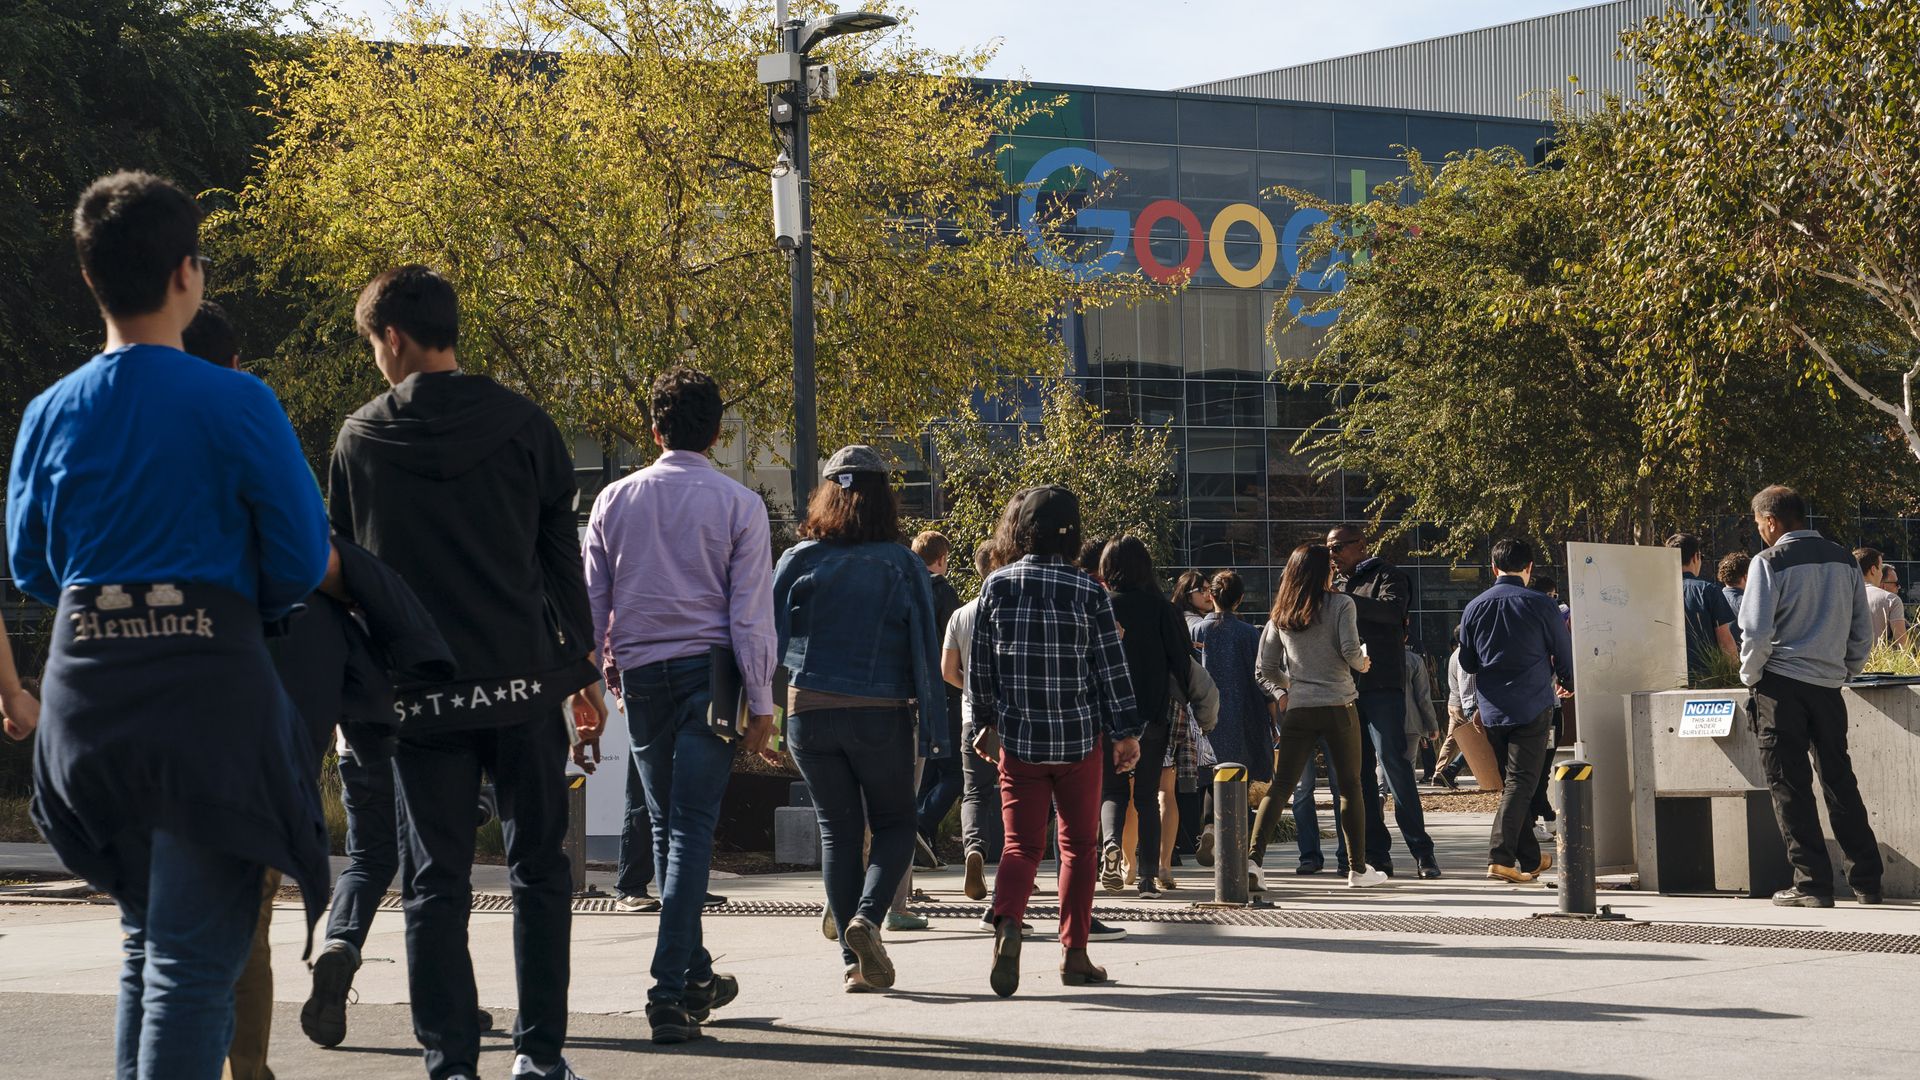 Google employees walkout in diagonal line with Google logo in background.